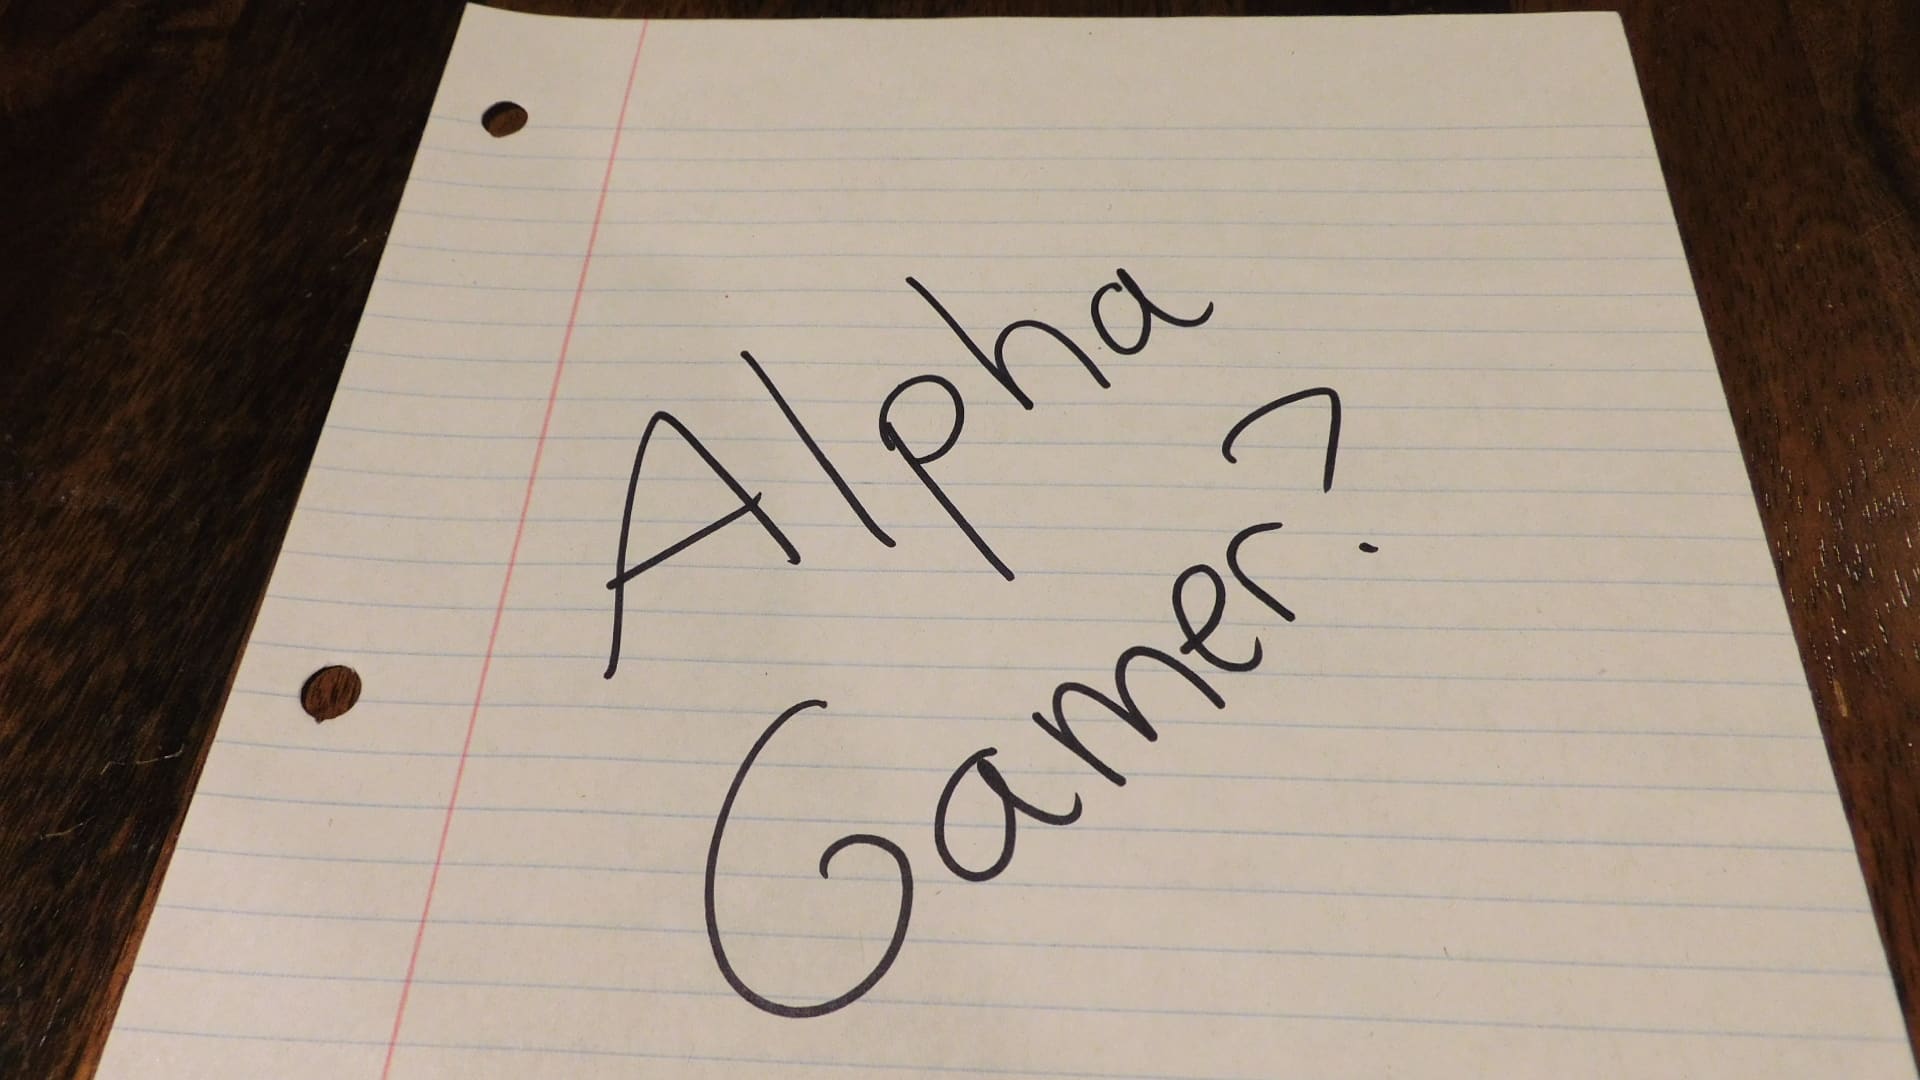 A piece of paper that says, "Alpha Gamer?"